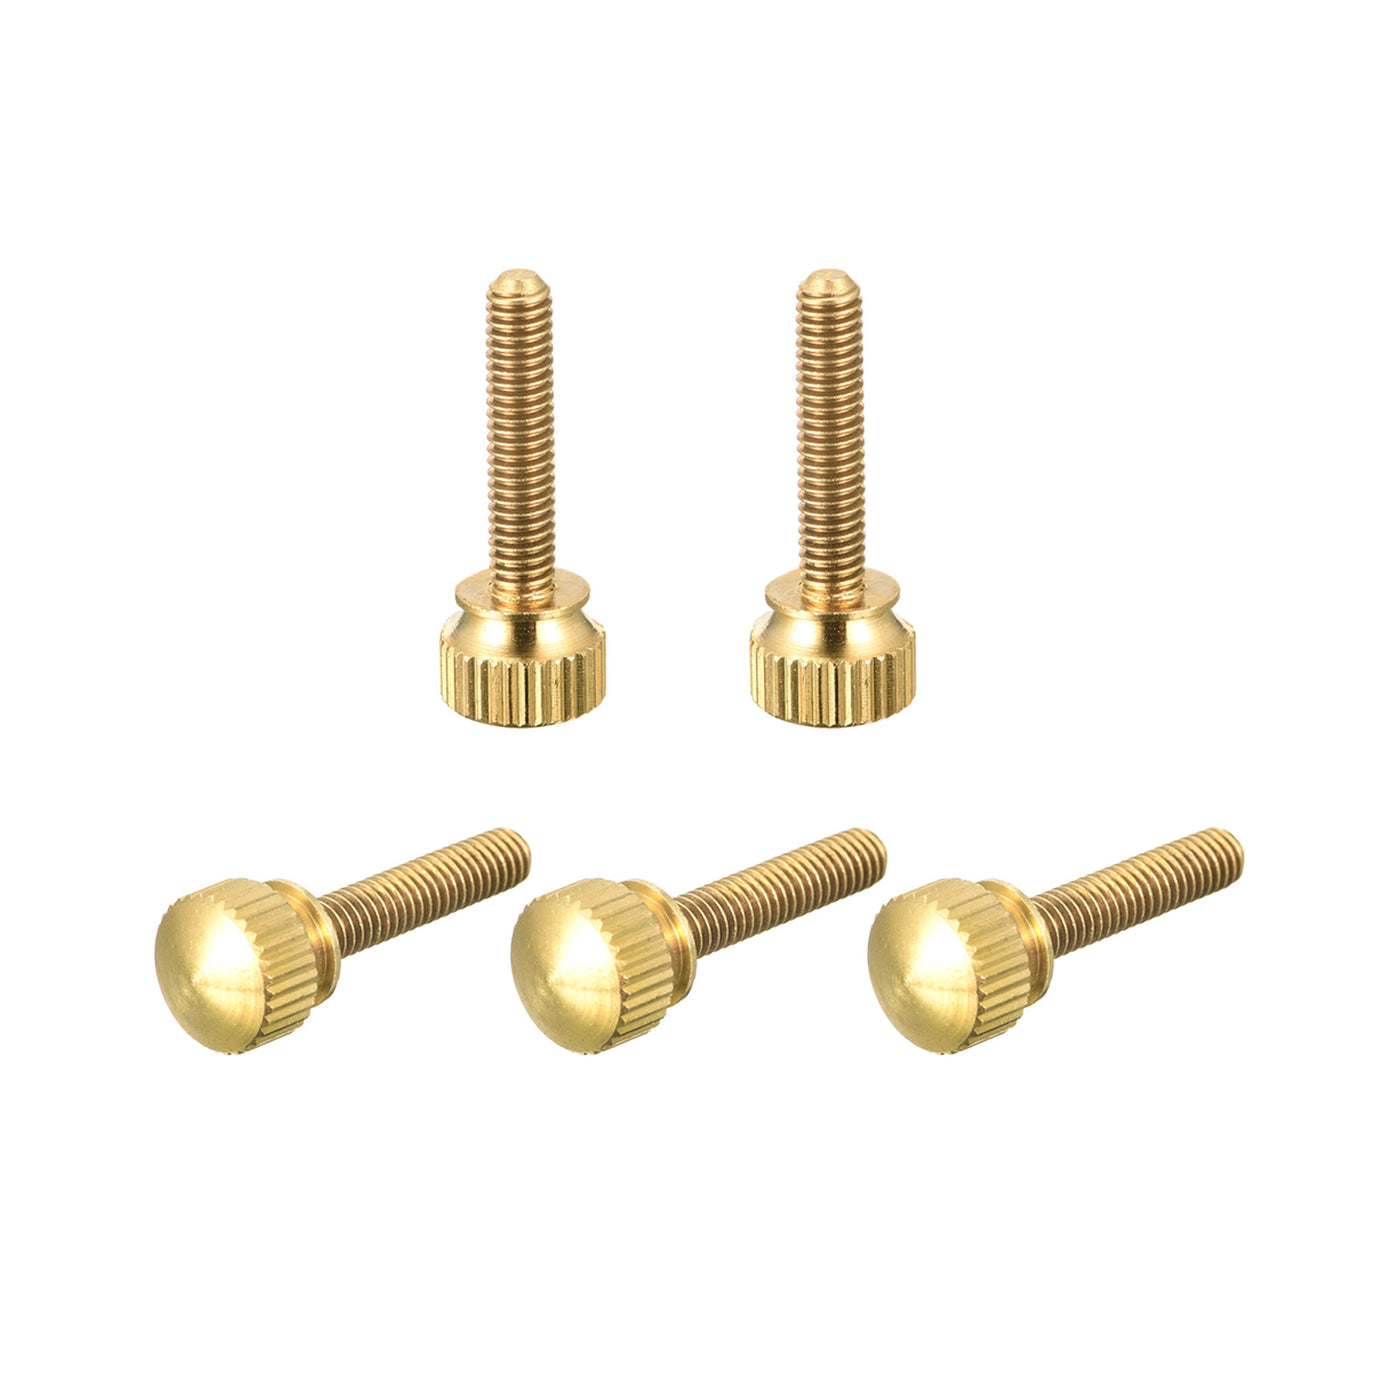 uxcell Uxcell 5Pcs Knurled Thumb Screws, M4x20mm Brass Shoulder Bolts Stepped Grip Knobs Fasteners for PC, Electronic, Mechanical